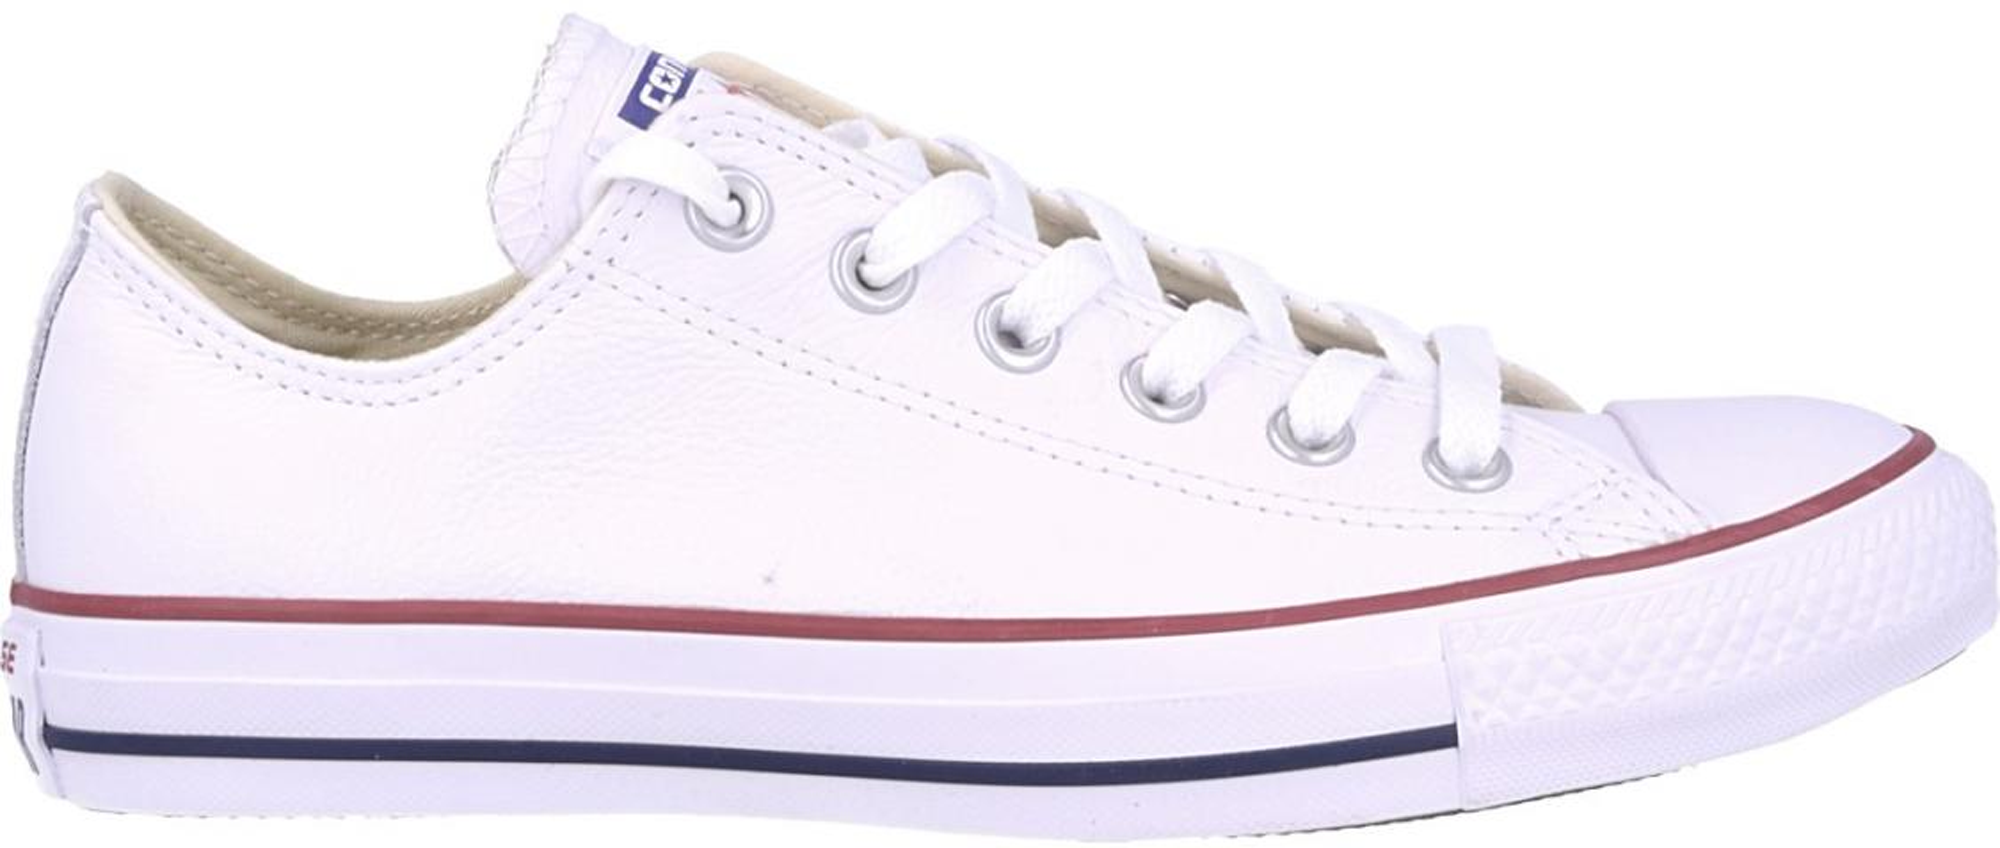 converse all star ox white leather